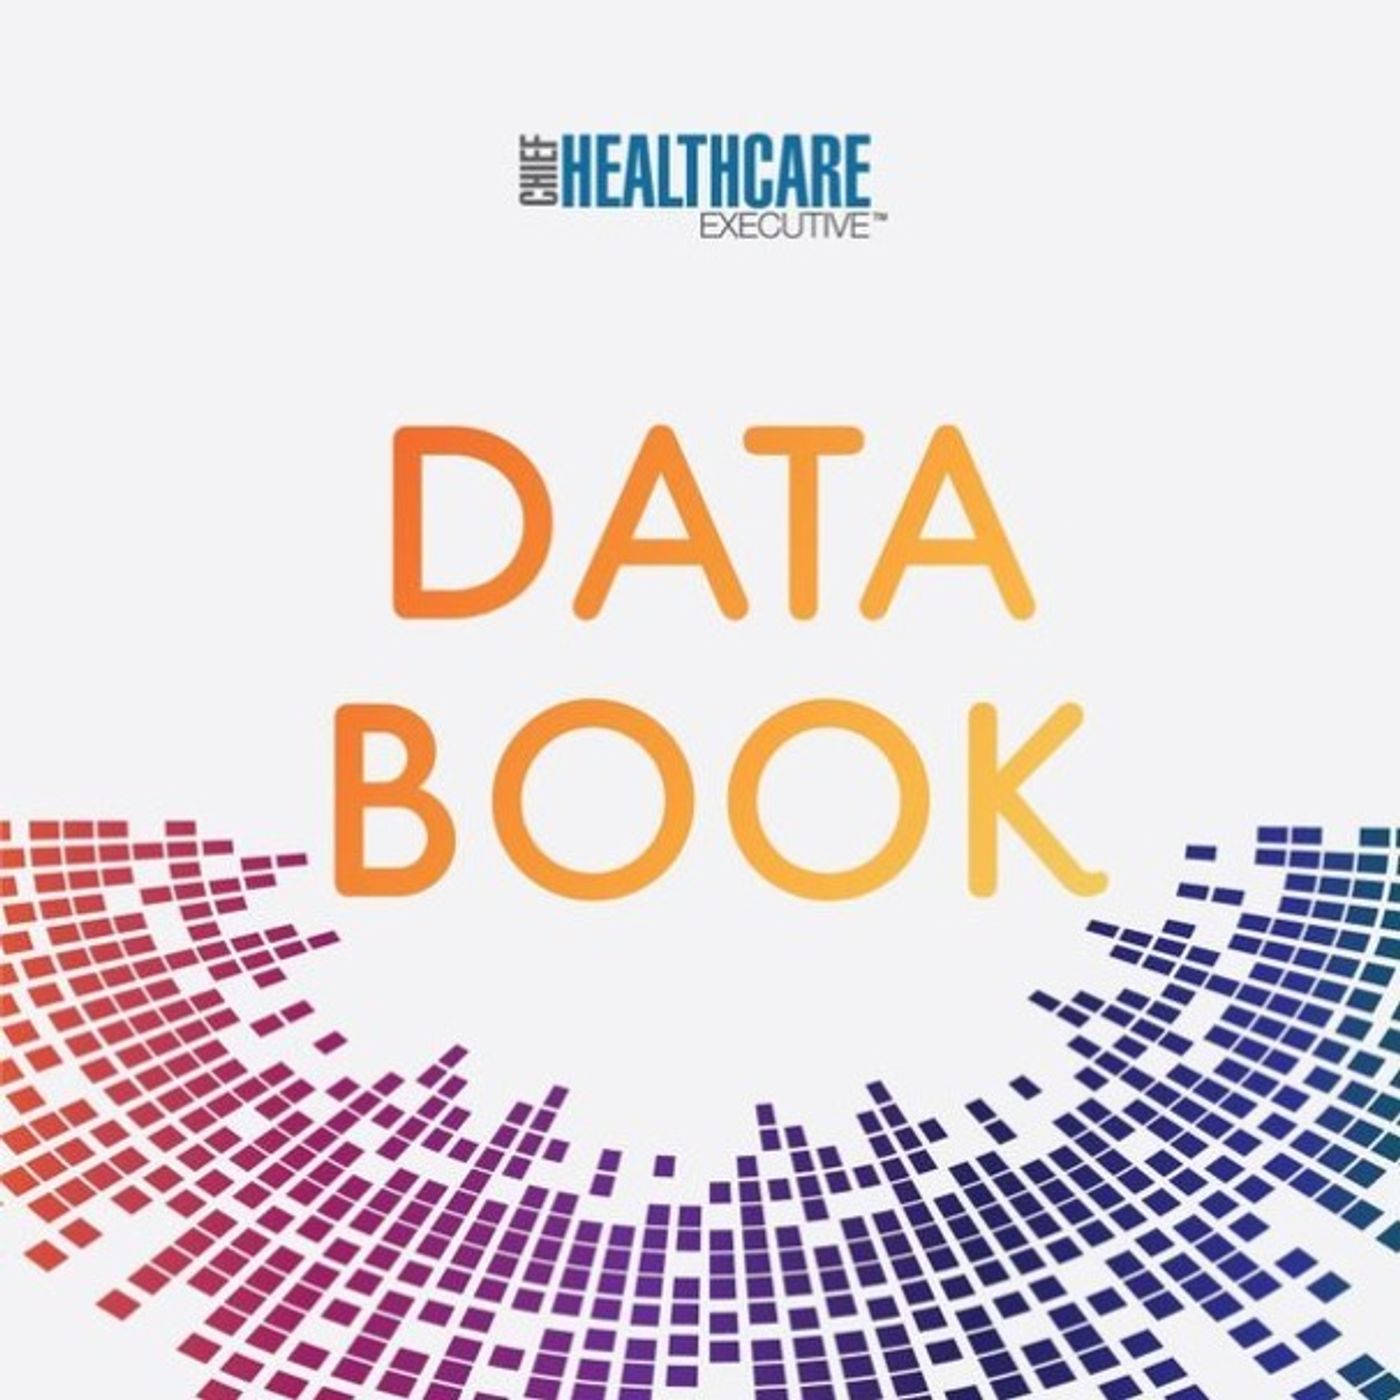 S8 Ep3: Data Book: The risk of third party cyberattacks in healthcare